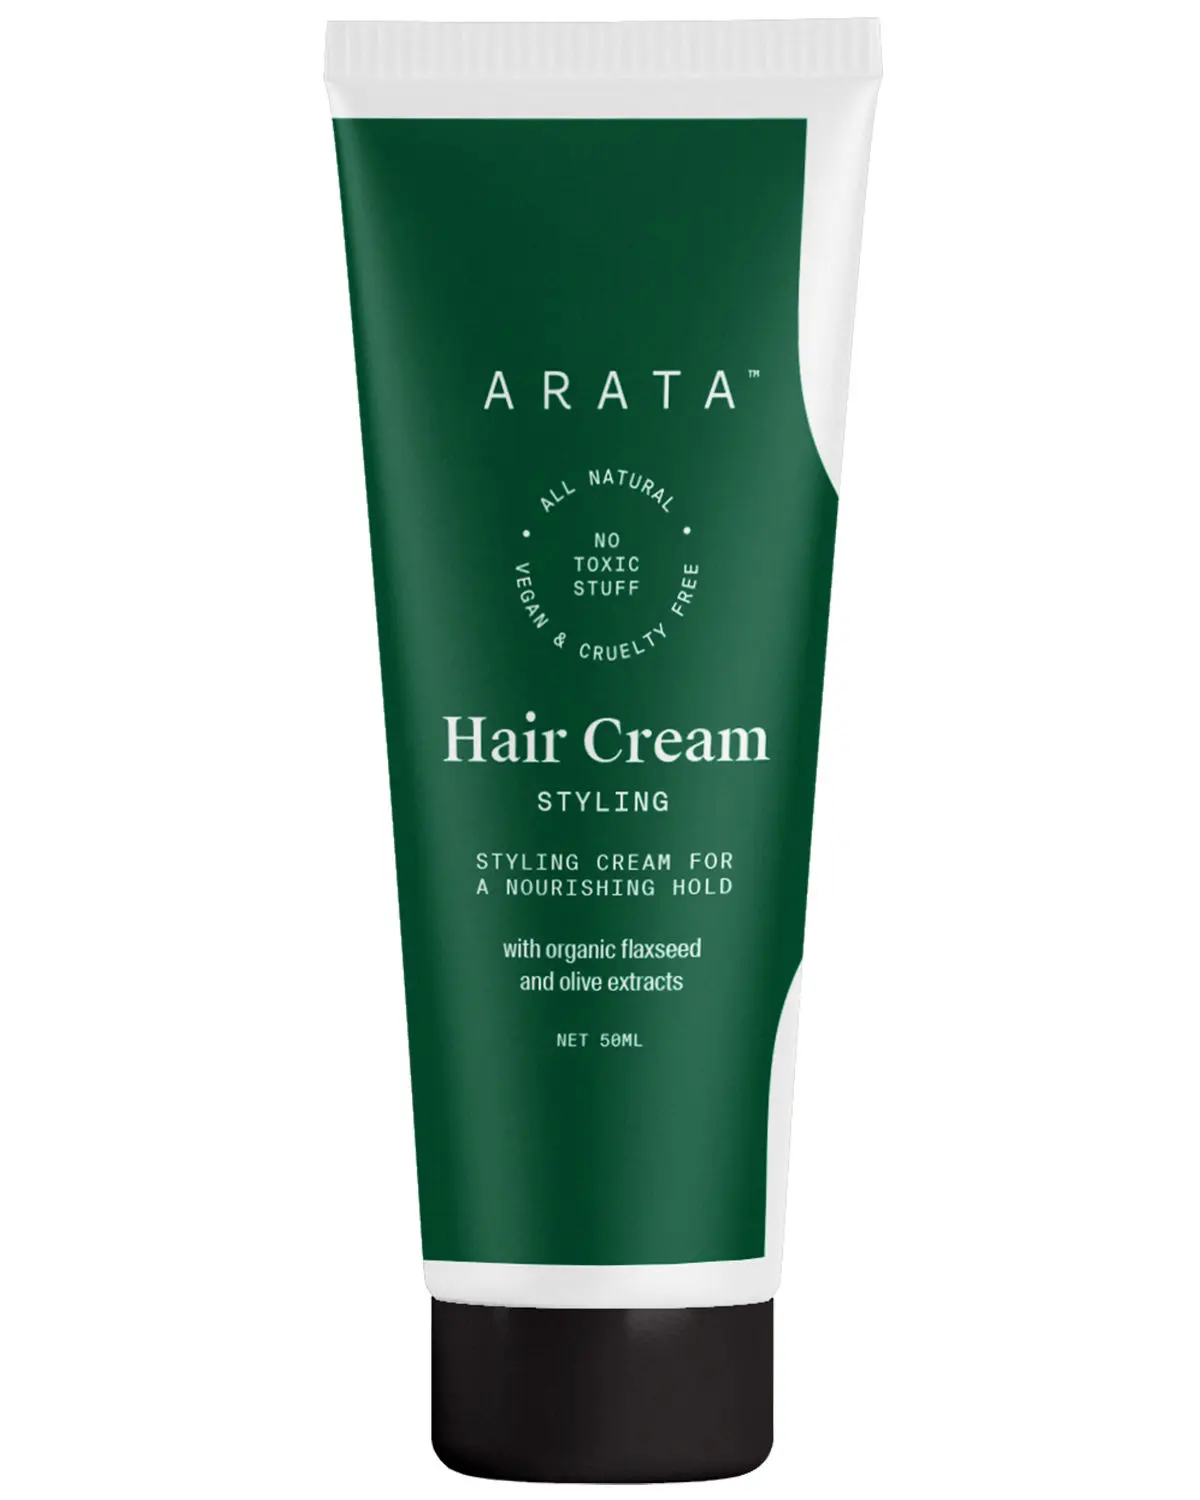 Arata Natural Styling & Hold Hair Cream With Organic Flaxseed & Olive Oil | All-Natural, Vegan & Cruelty-Free | Styling & Hair Growth Formula For Men & Women (50 g)